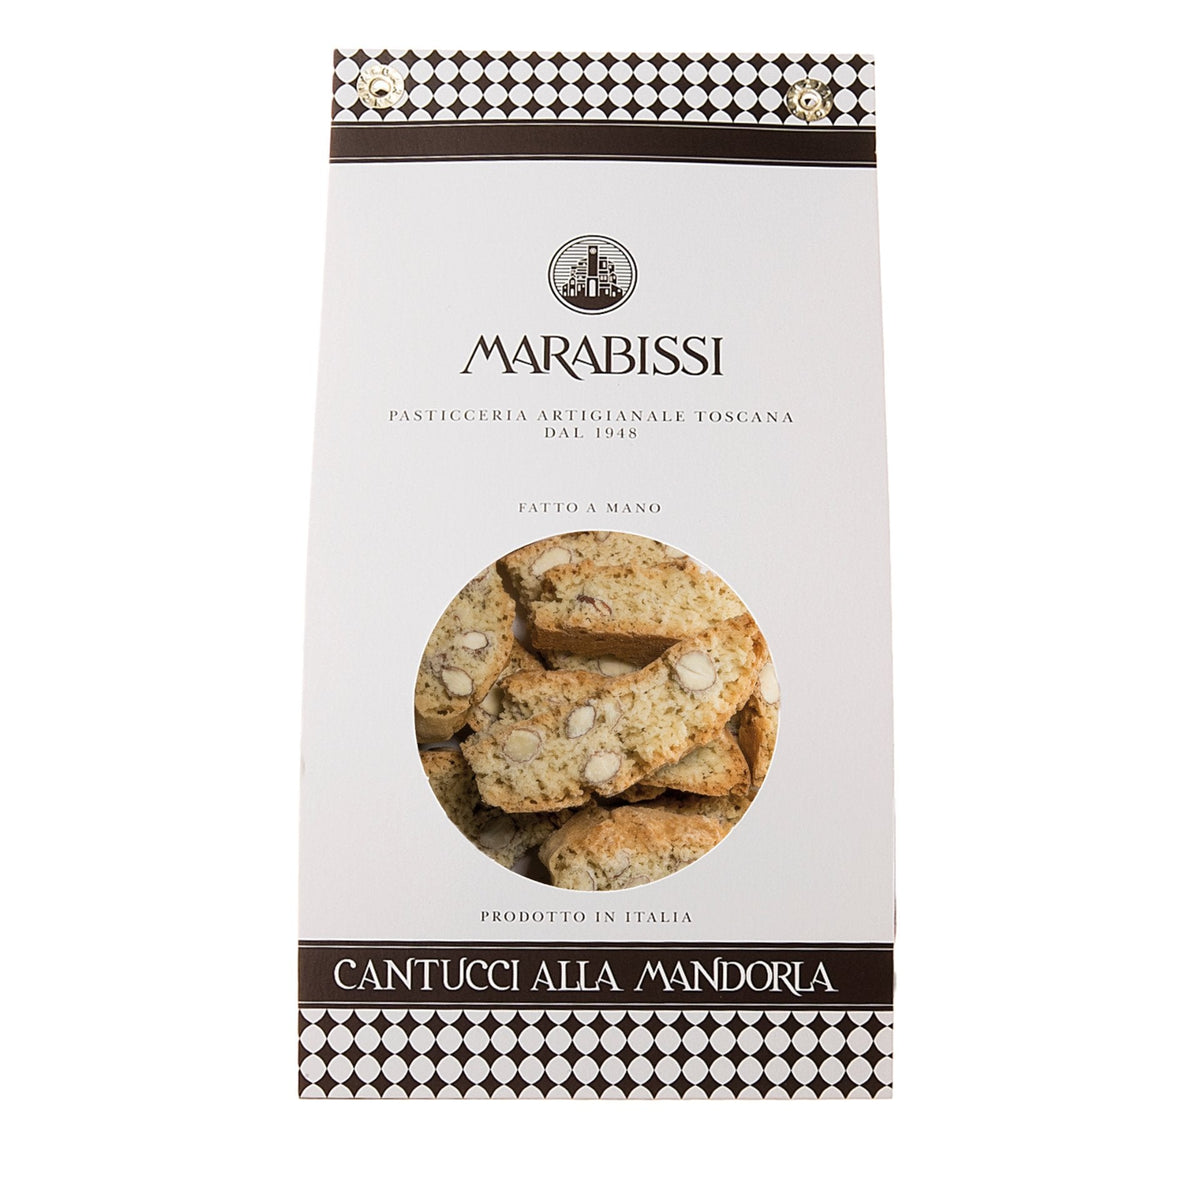 Marabissi Almond Cantucci (White Bag) 200g  | Imported and distributed in the UK by Just Gourmet Foods